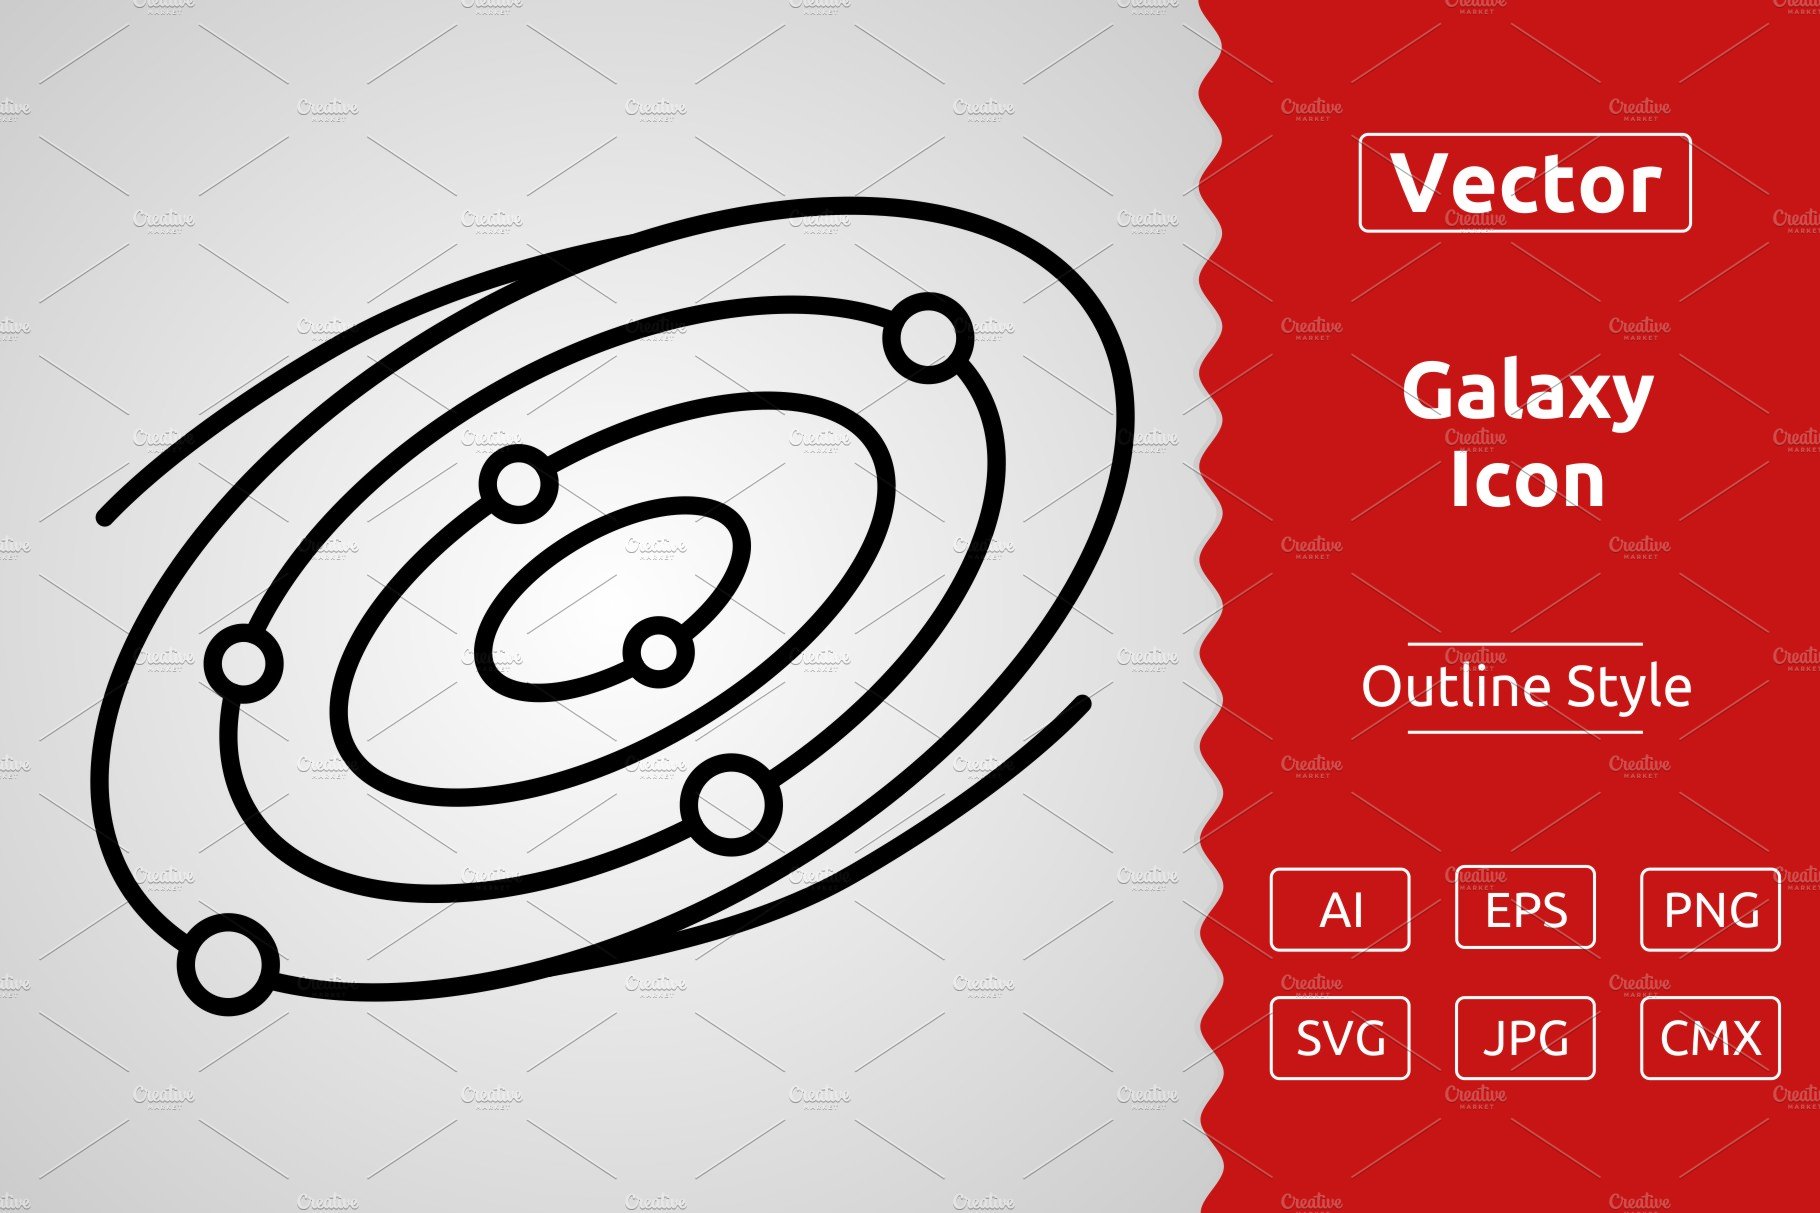 Vector Galaxy Outline Icon cover image.